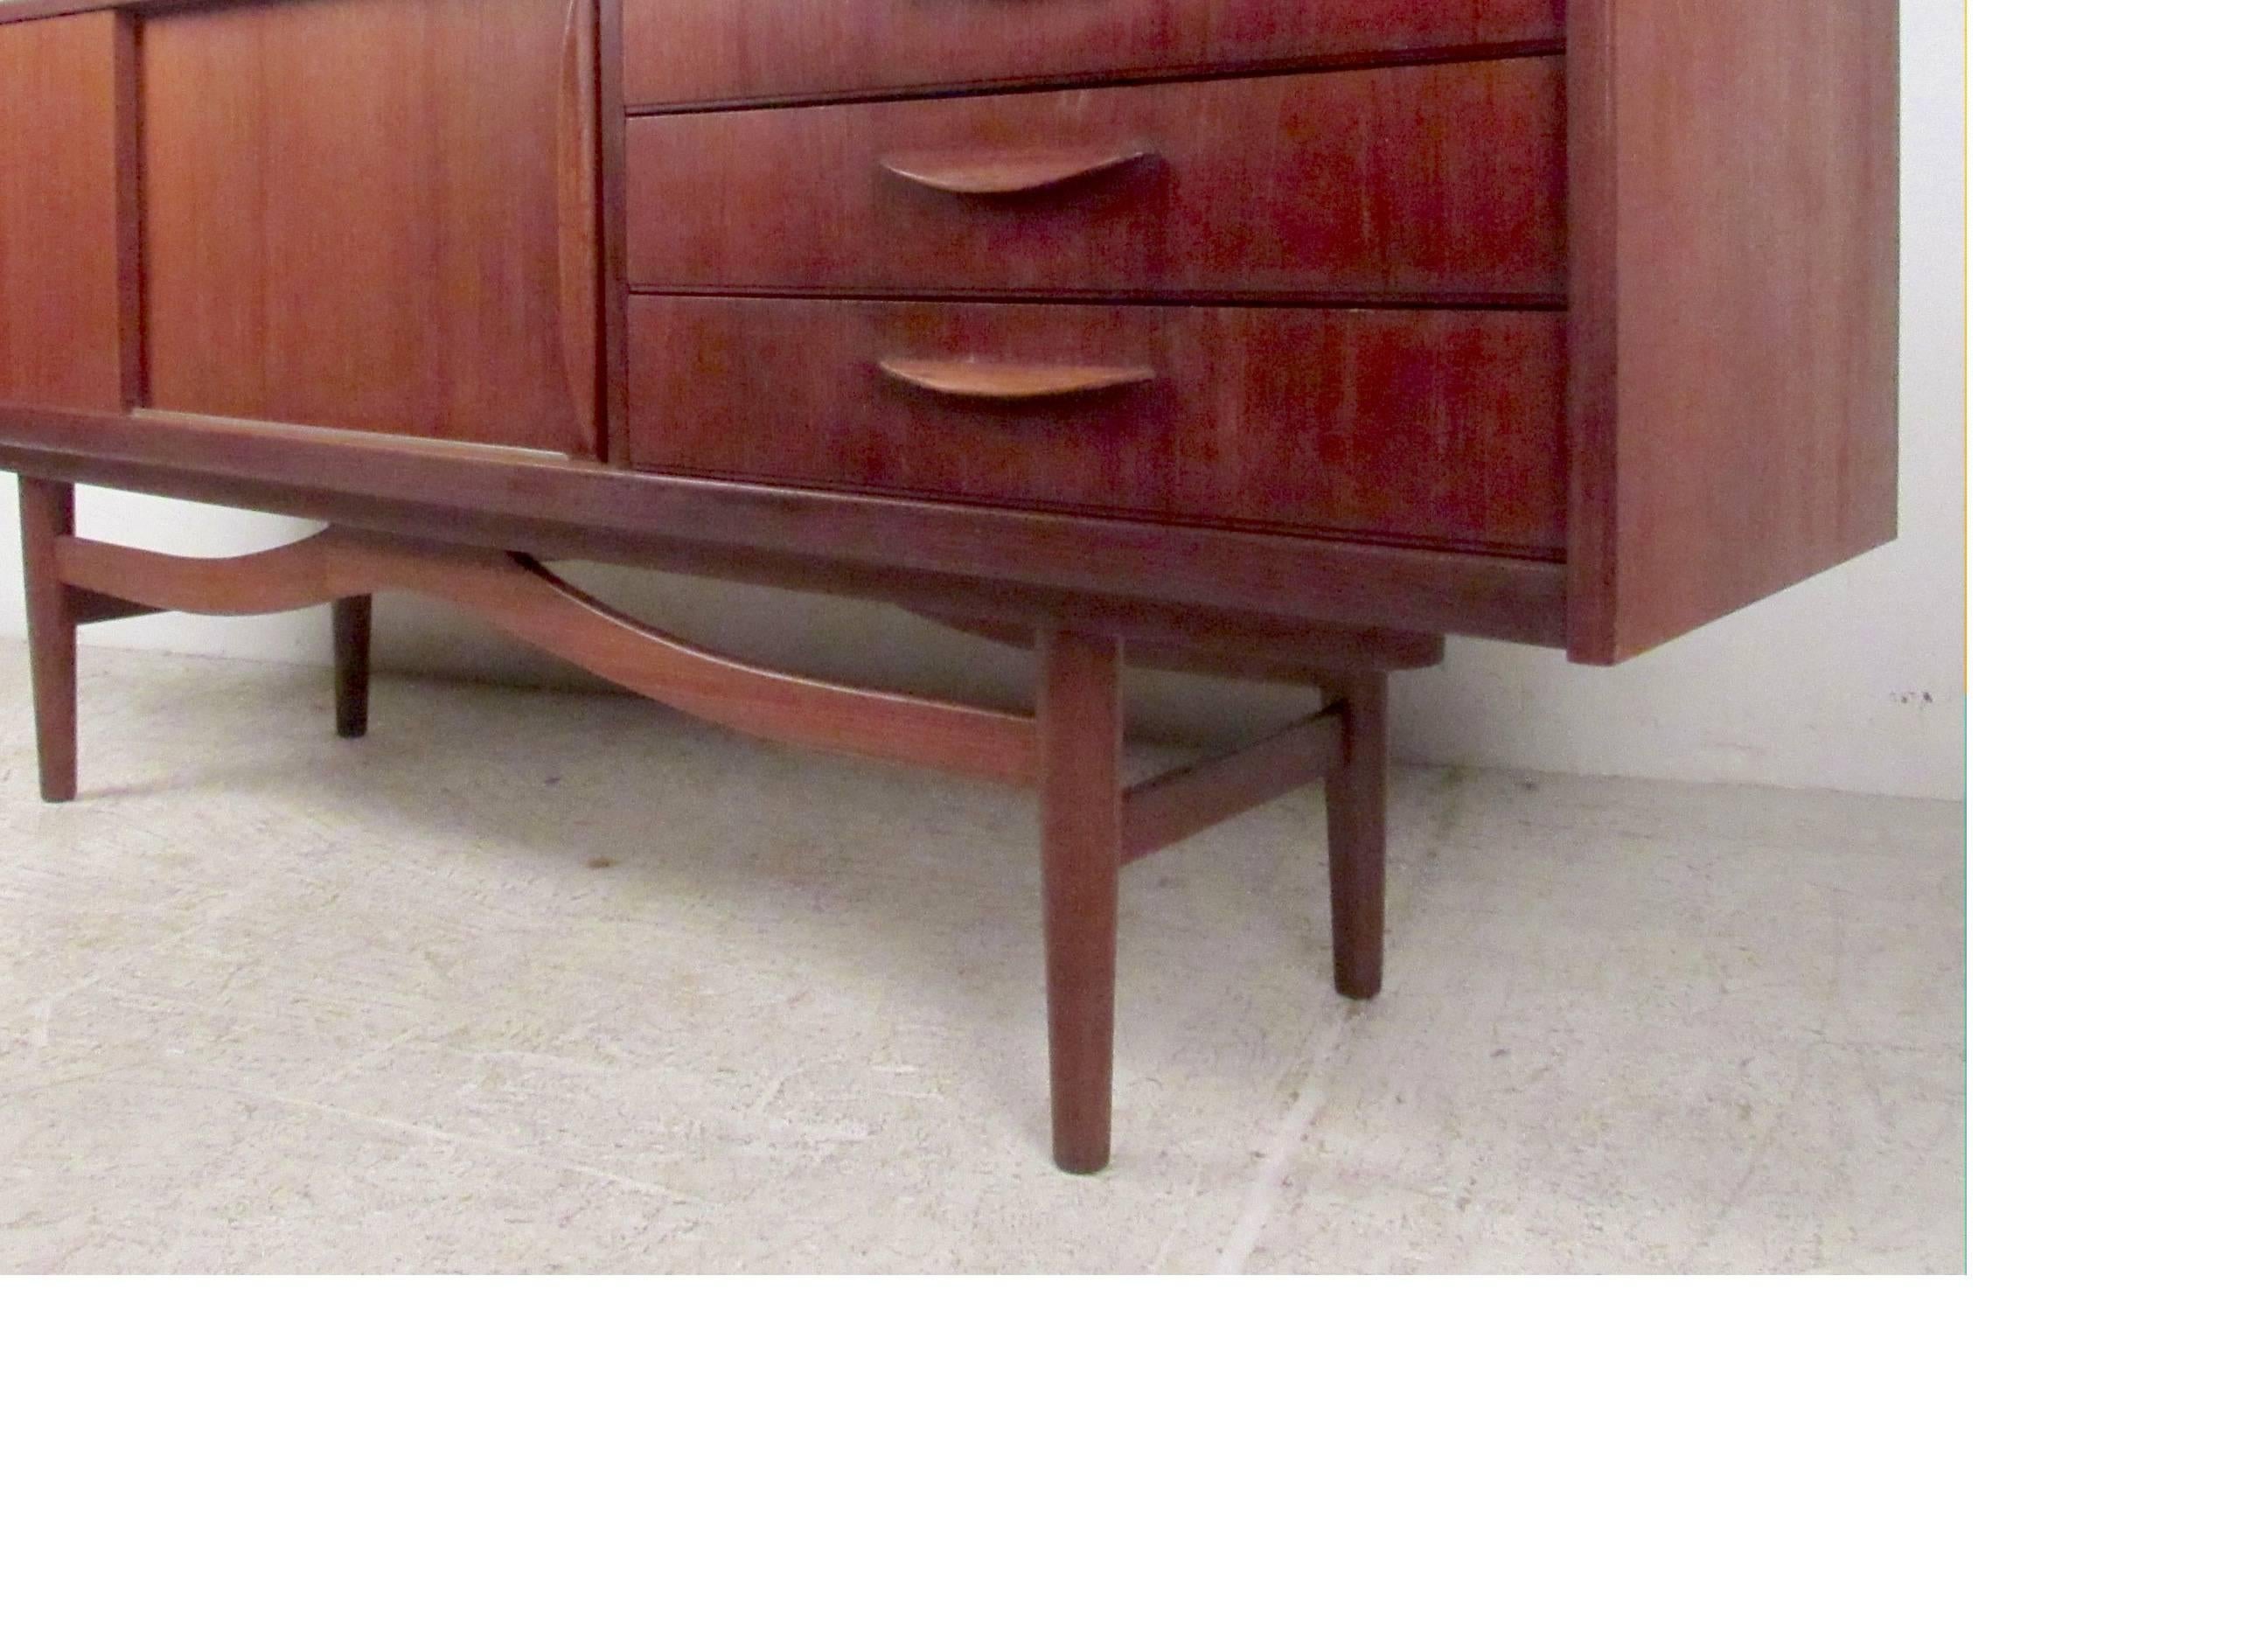 Vintage-modern Danish sideboard featuring beautifully sculpted base and handles with rich teak wood grain throughout.

Please confirm item location NY or NJ with dealer.